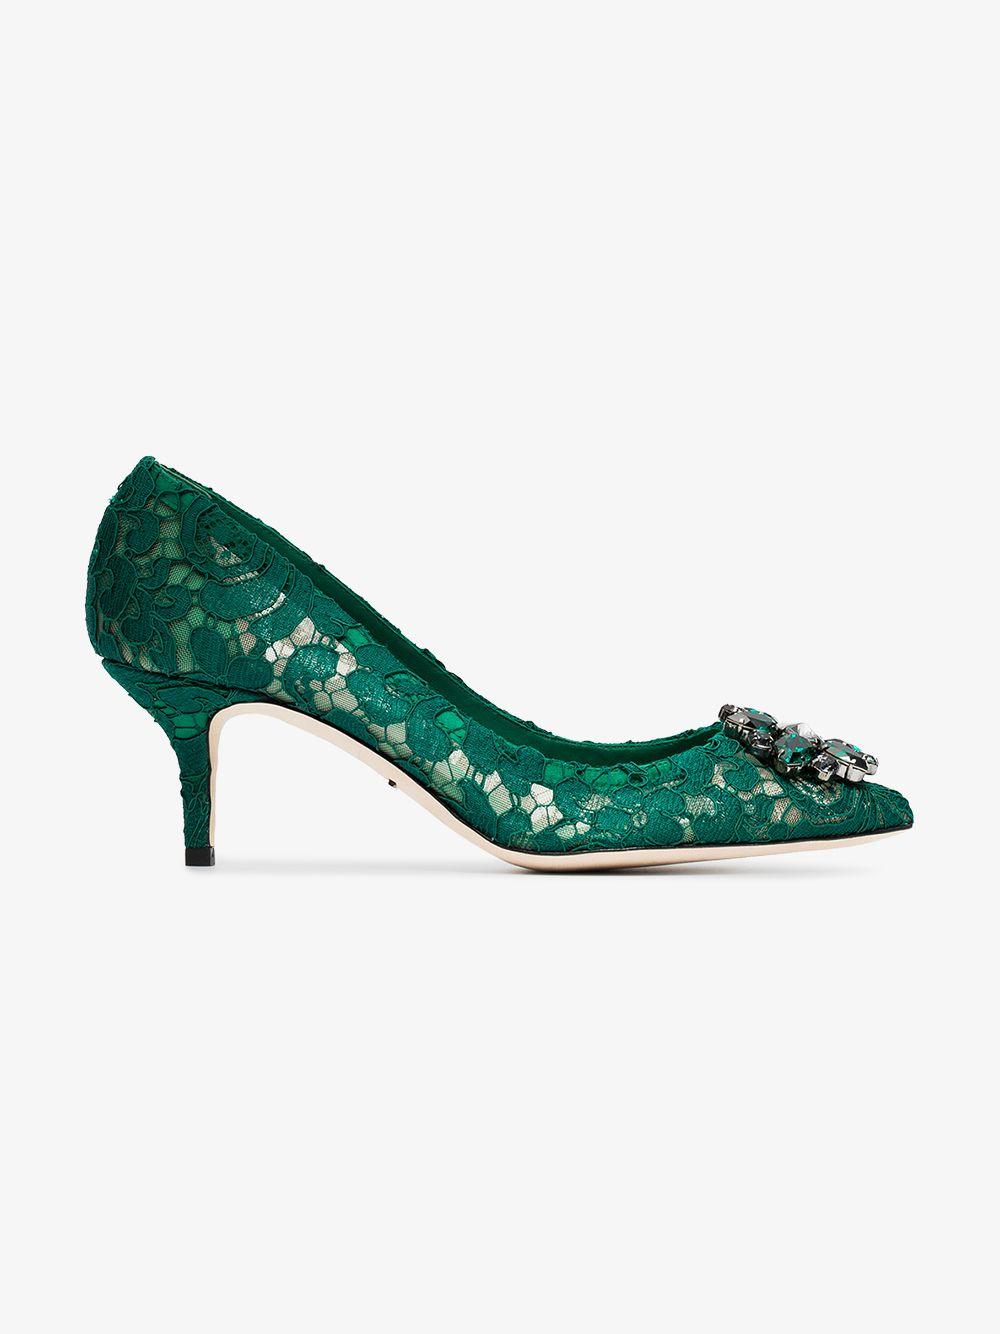 Dolce & Gabbana Lace Rainbow Pumps With Brooch Detailing in Green | Lyst UK